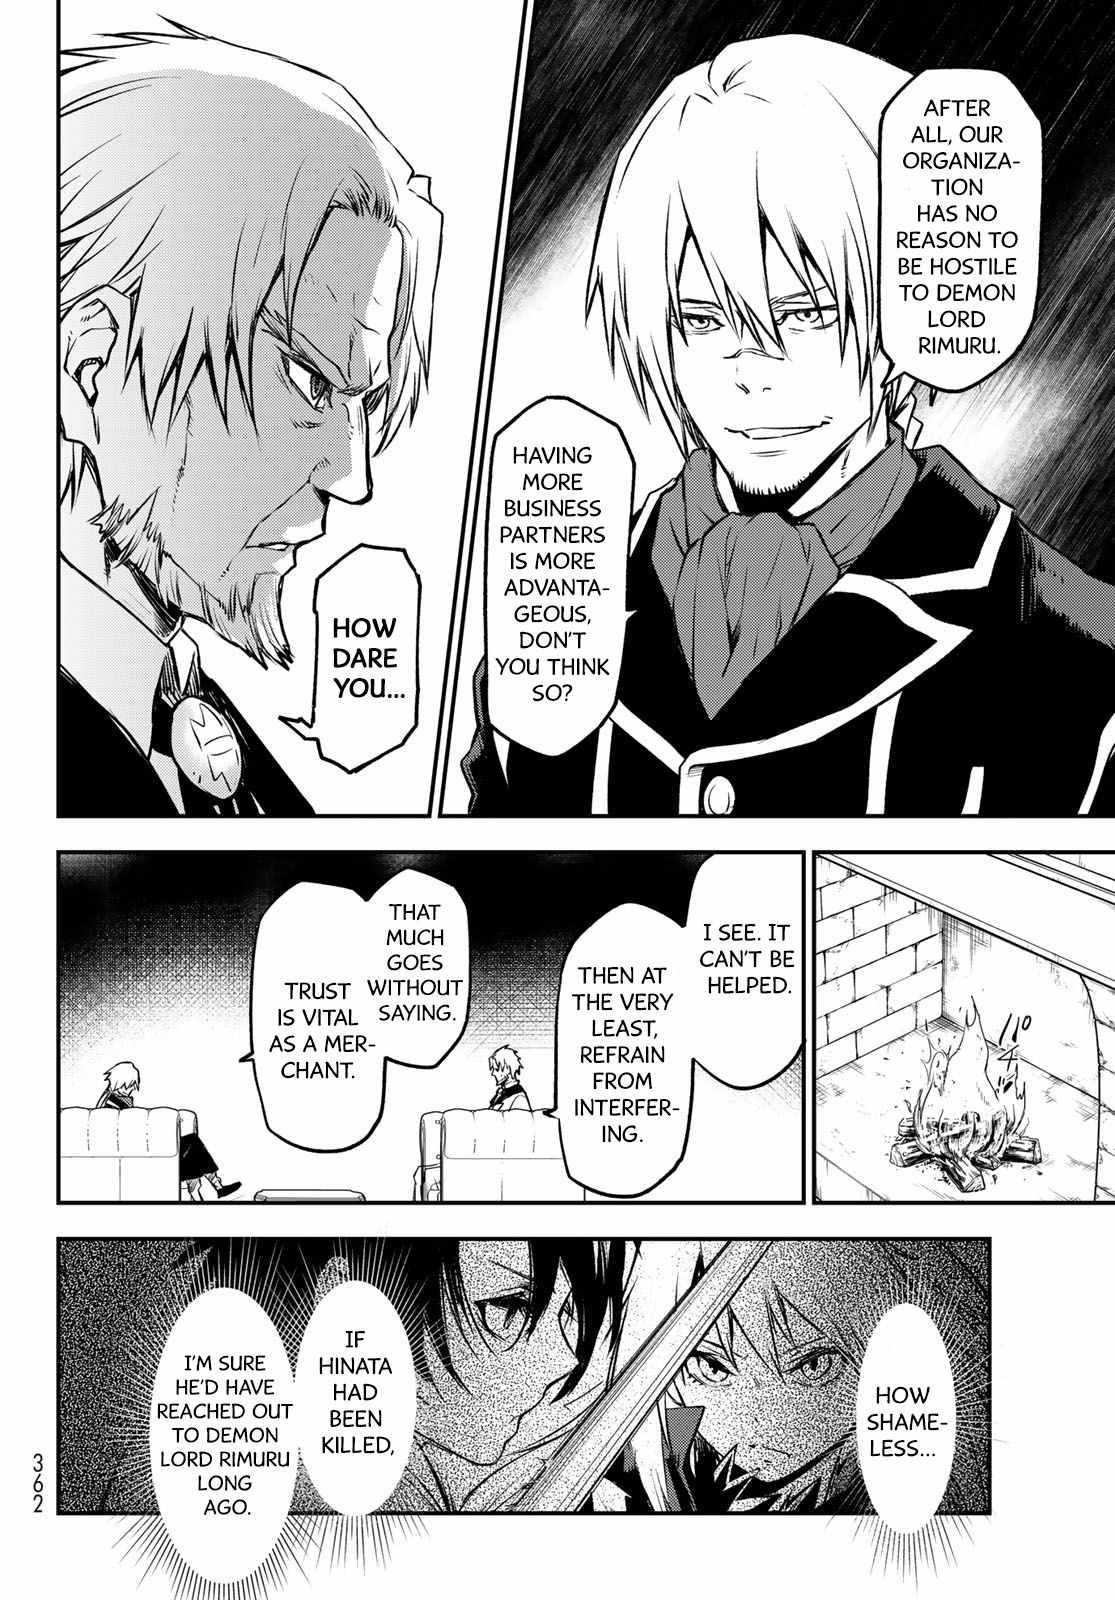 That Time I Got Reincarnated as a Slime, Chapter 98